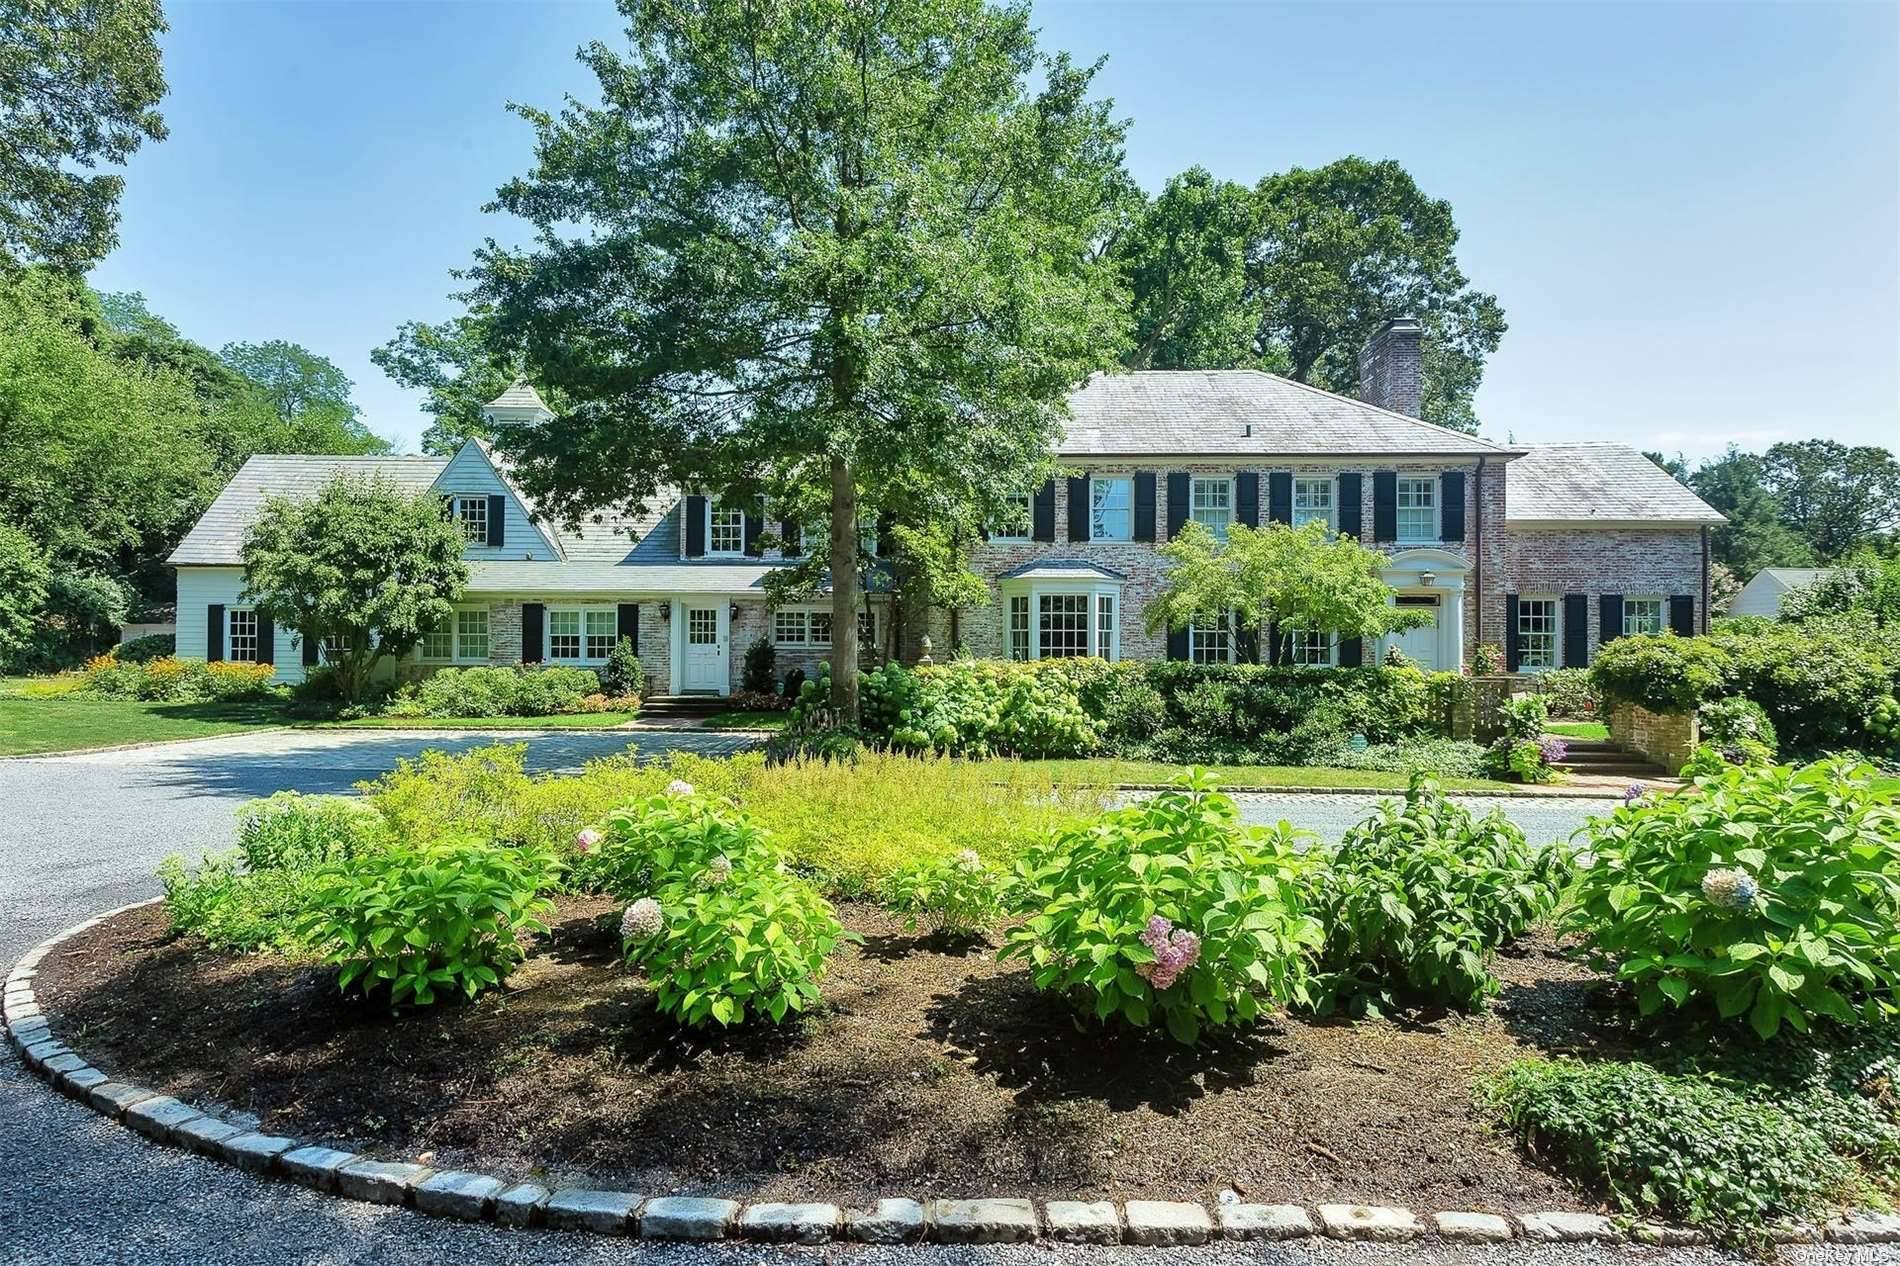 Historic, Beautiful Brick Colonial Manor House formerly a Grace Estate on Approximately 3.